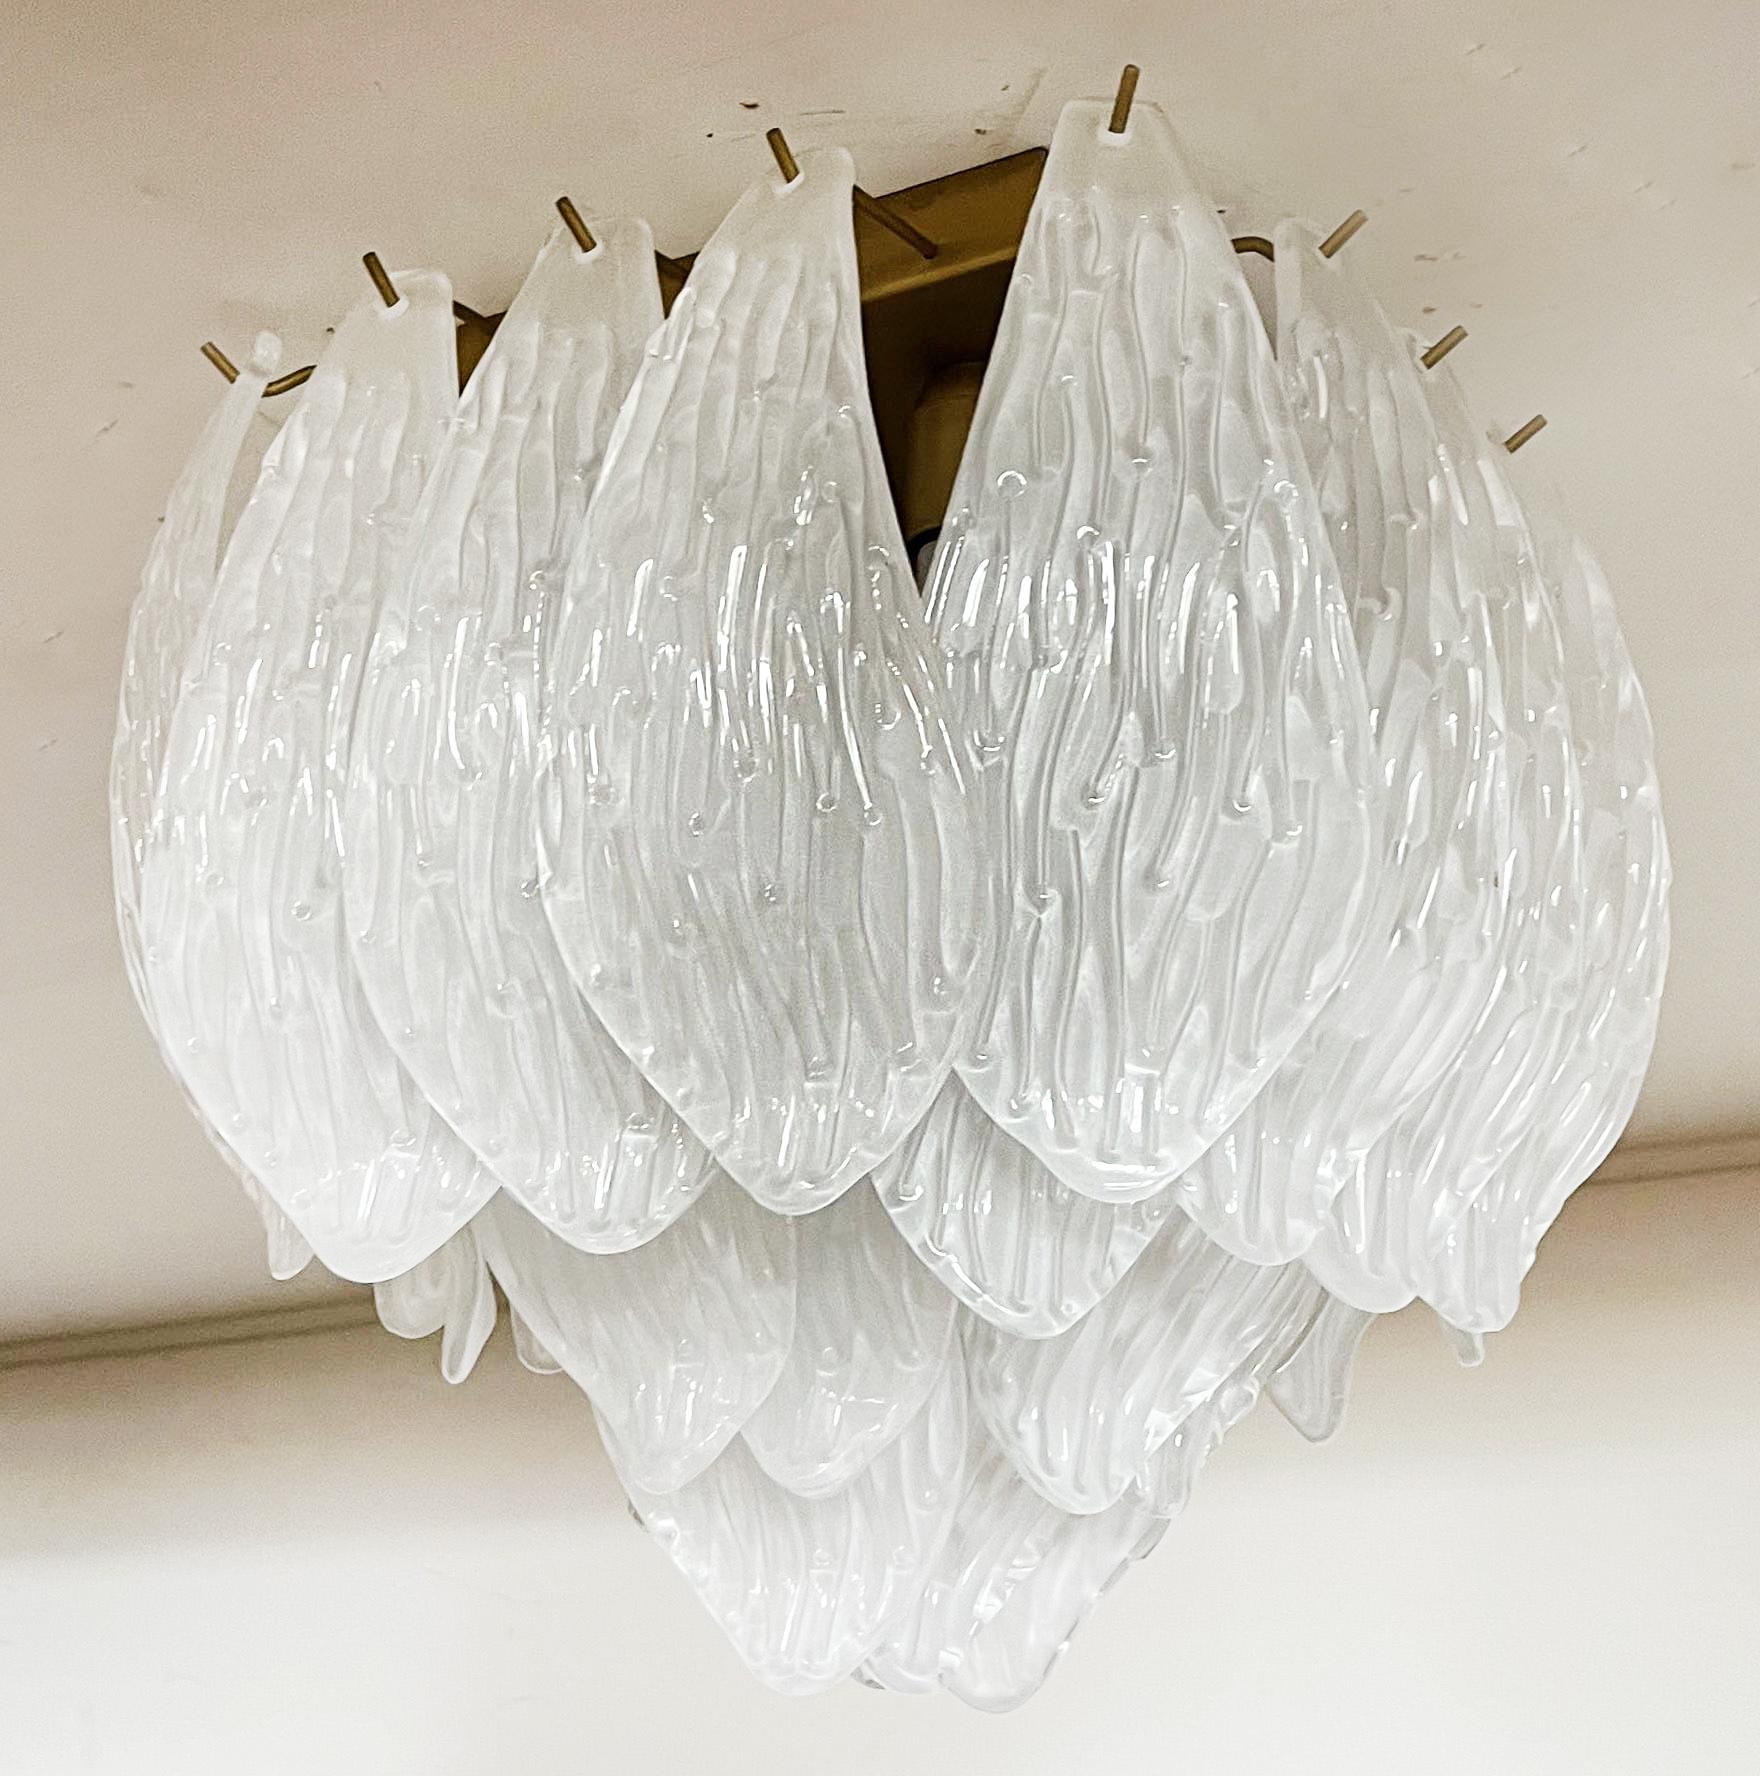 Wonderful Murano ceiling lamps - frosted carved glass leaves For Sale 4